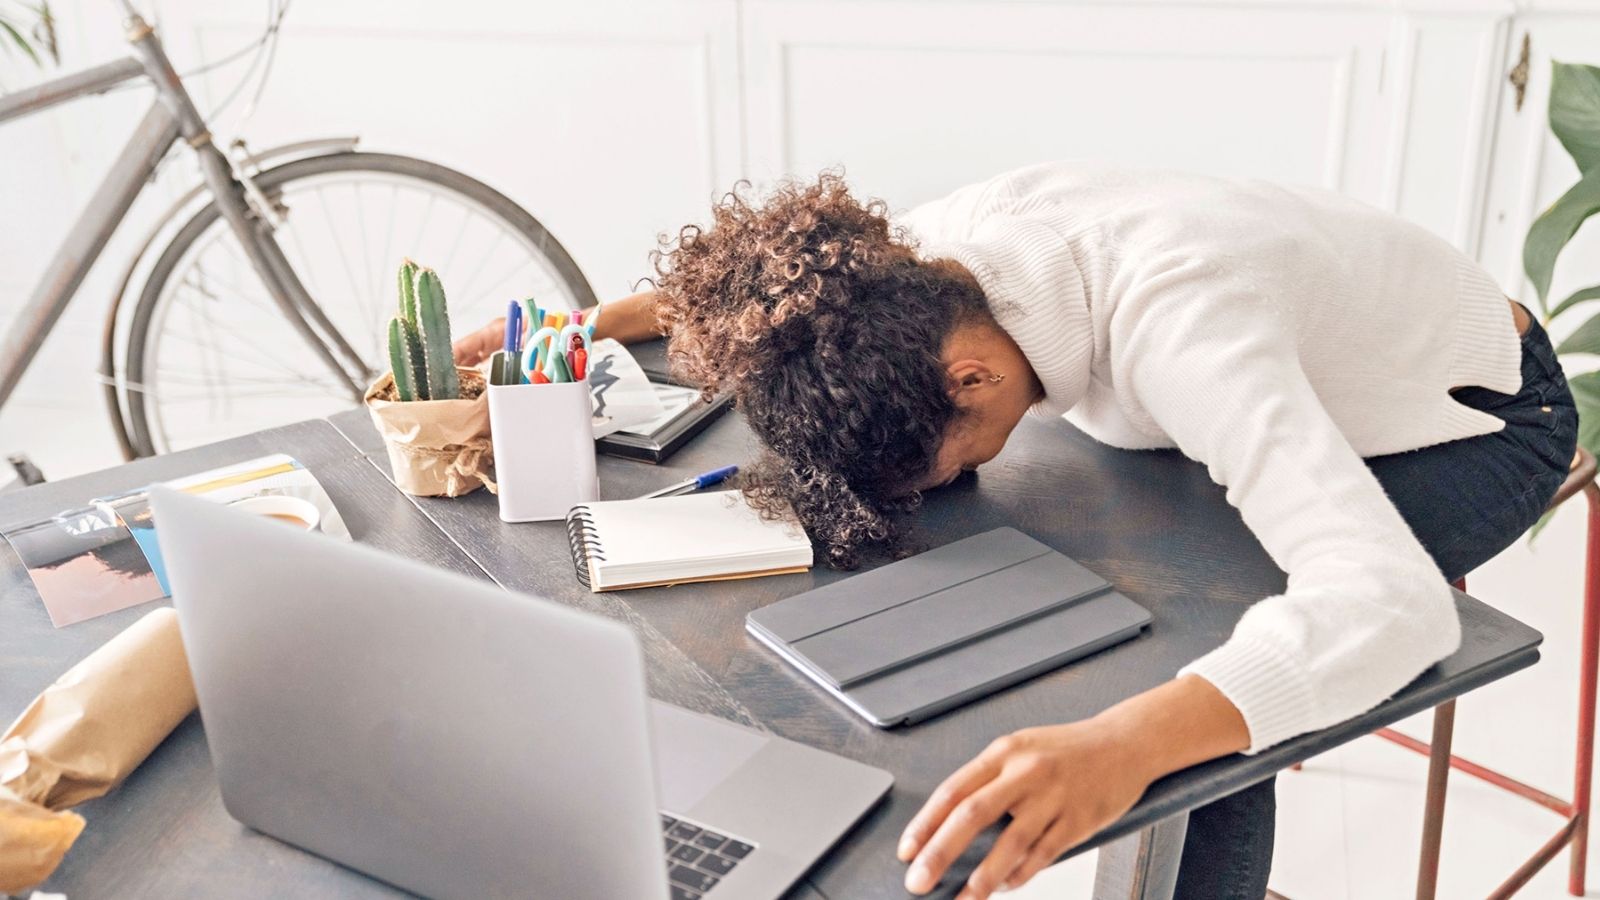 Have you ever gone into a deep slumber while working on your computer or your desktop?